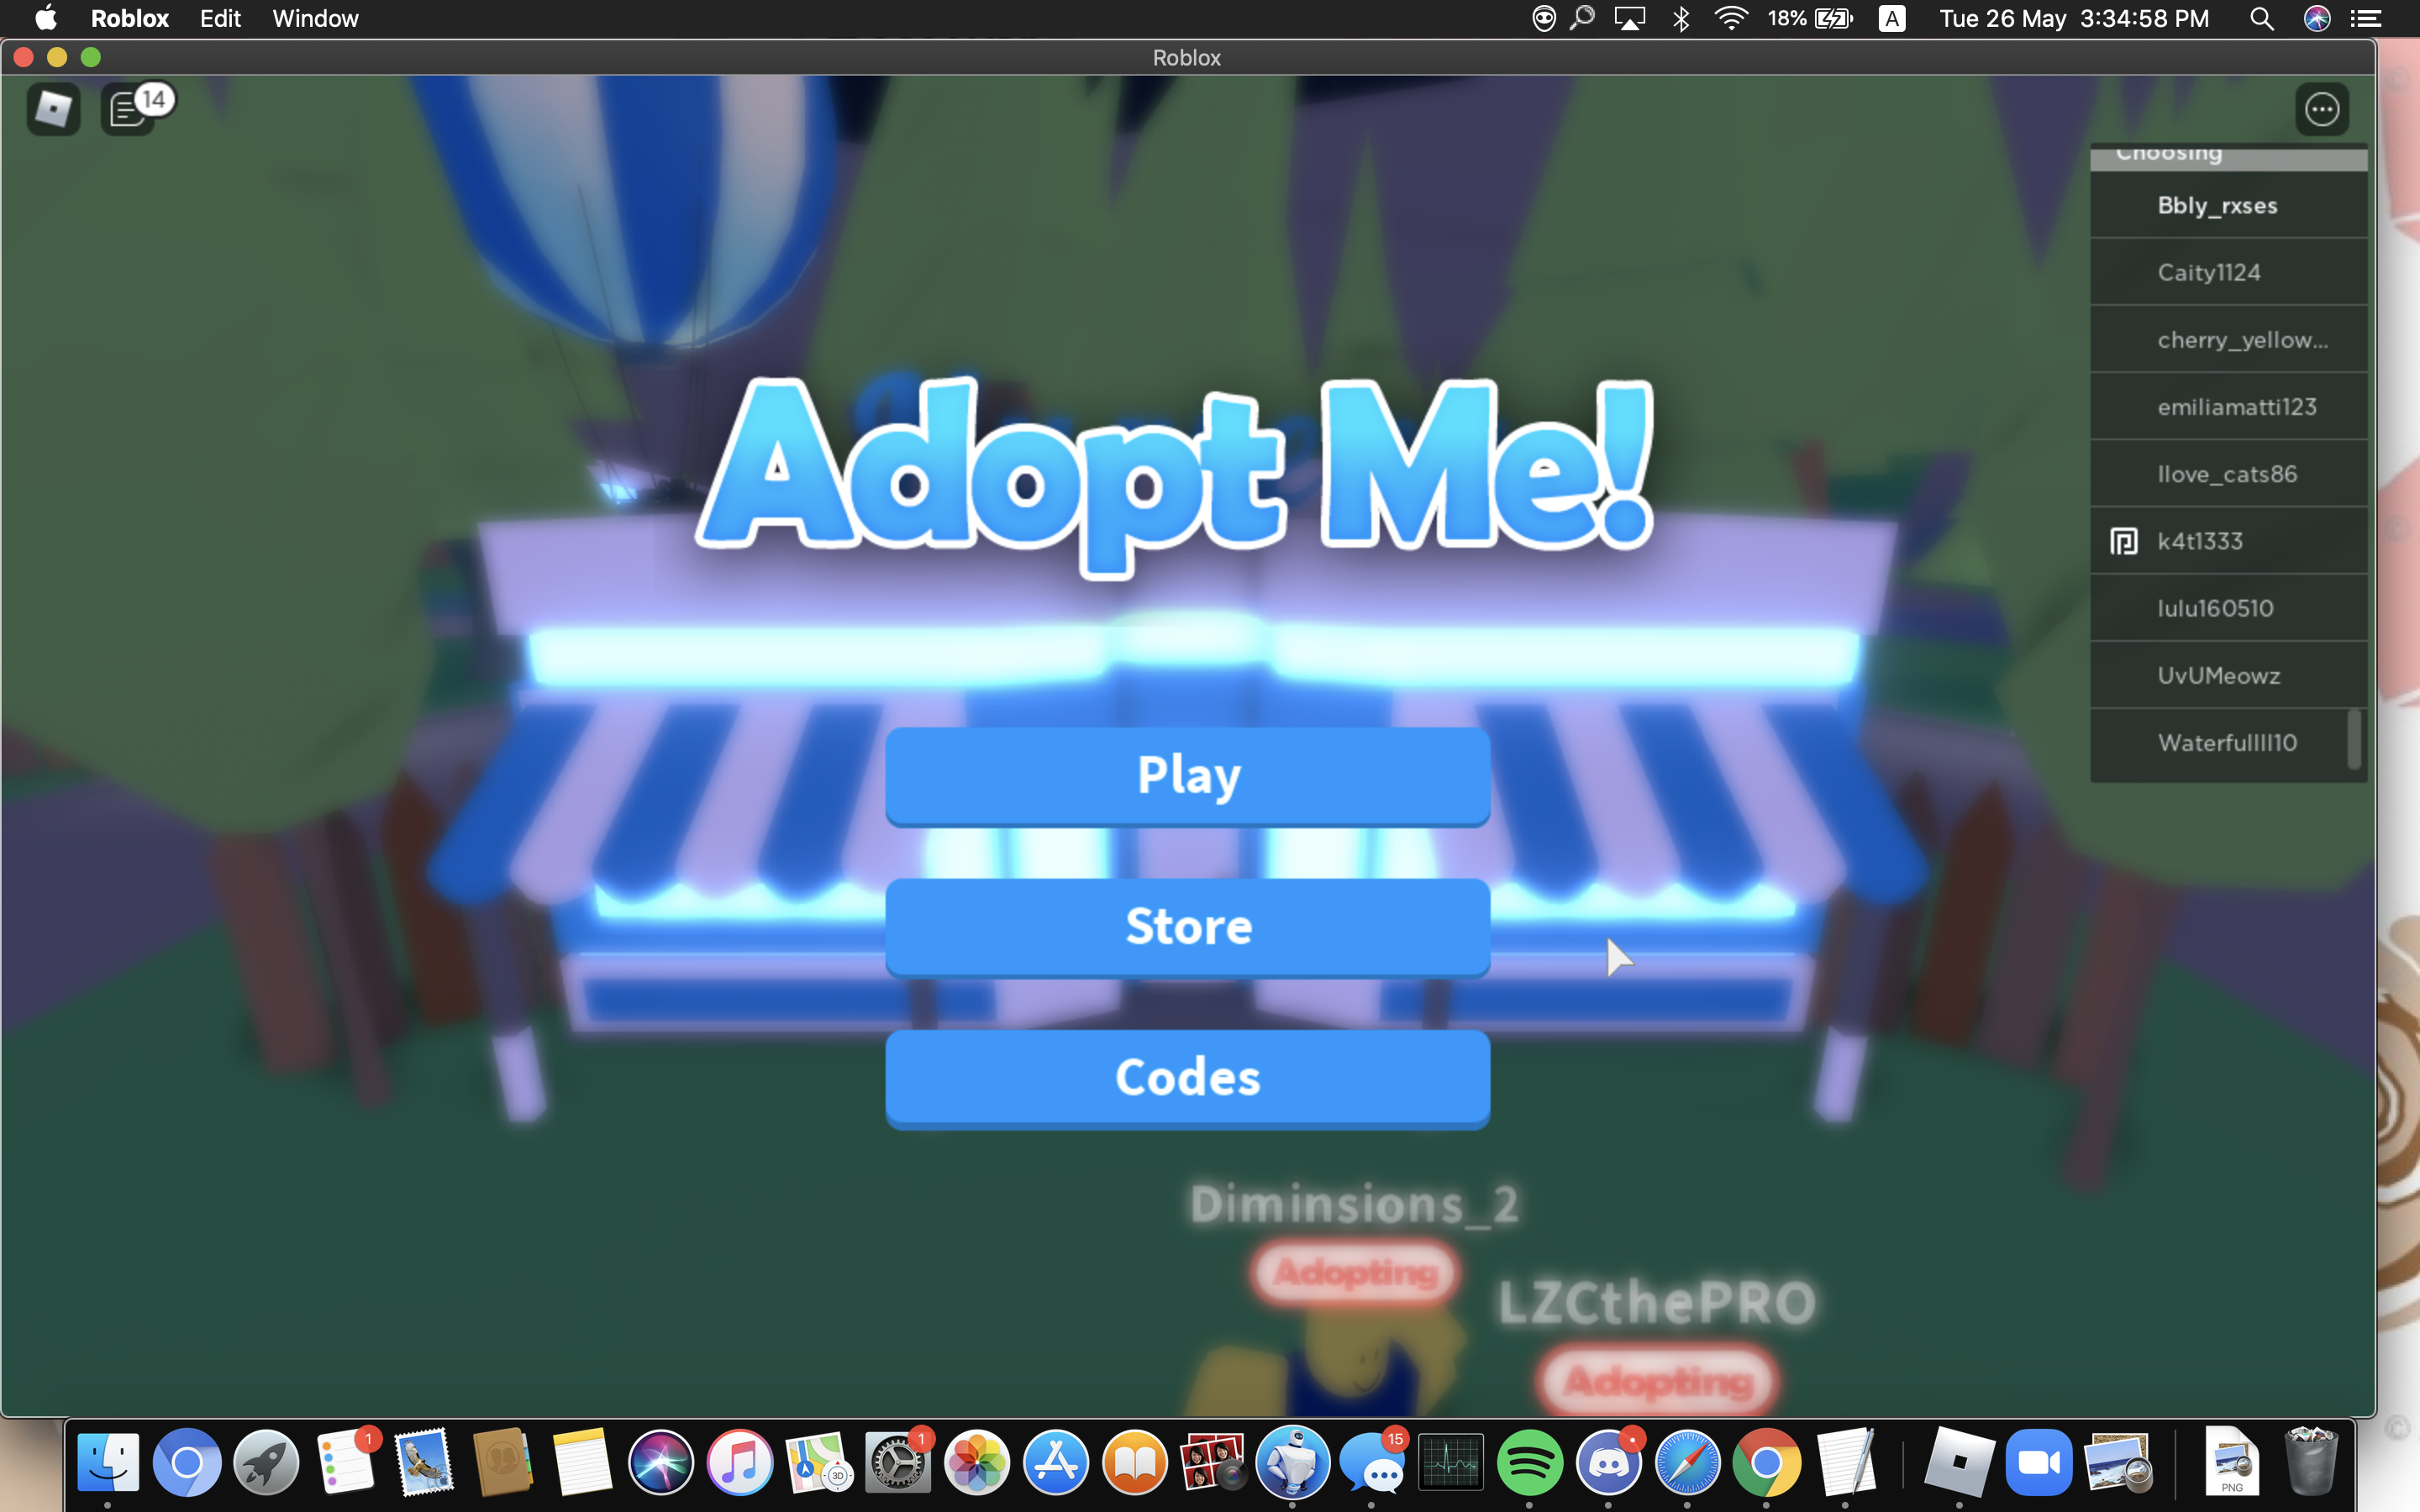 Went And Played Adopt Me Legacy D Link Below Fandom - web.roblox com